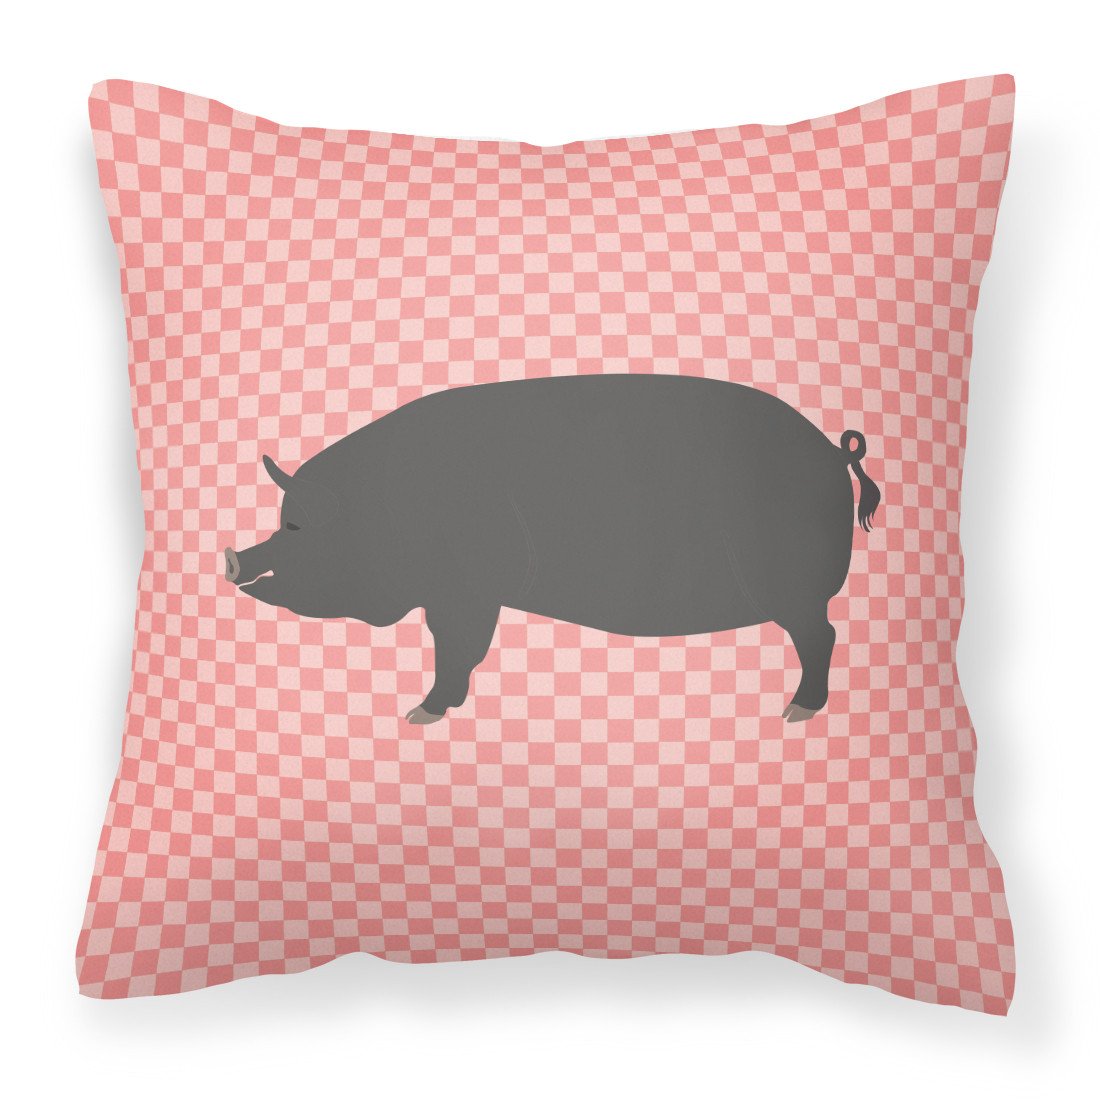 Berkshire Pig Pink Check Fabric Decorative Pillow BB7933PW1818 by Caroline's Treasures